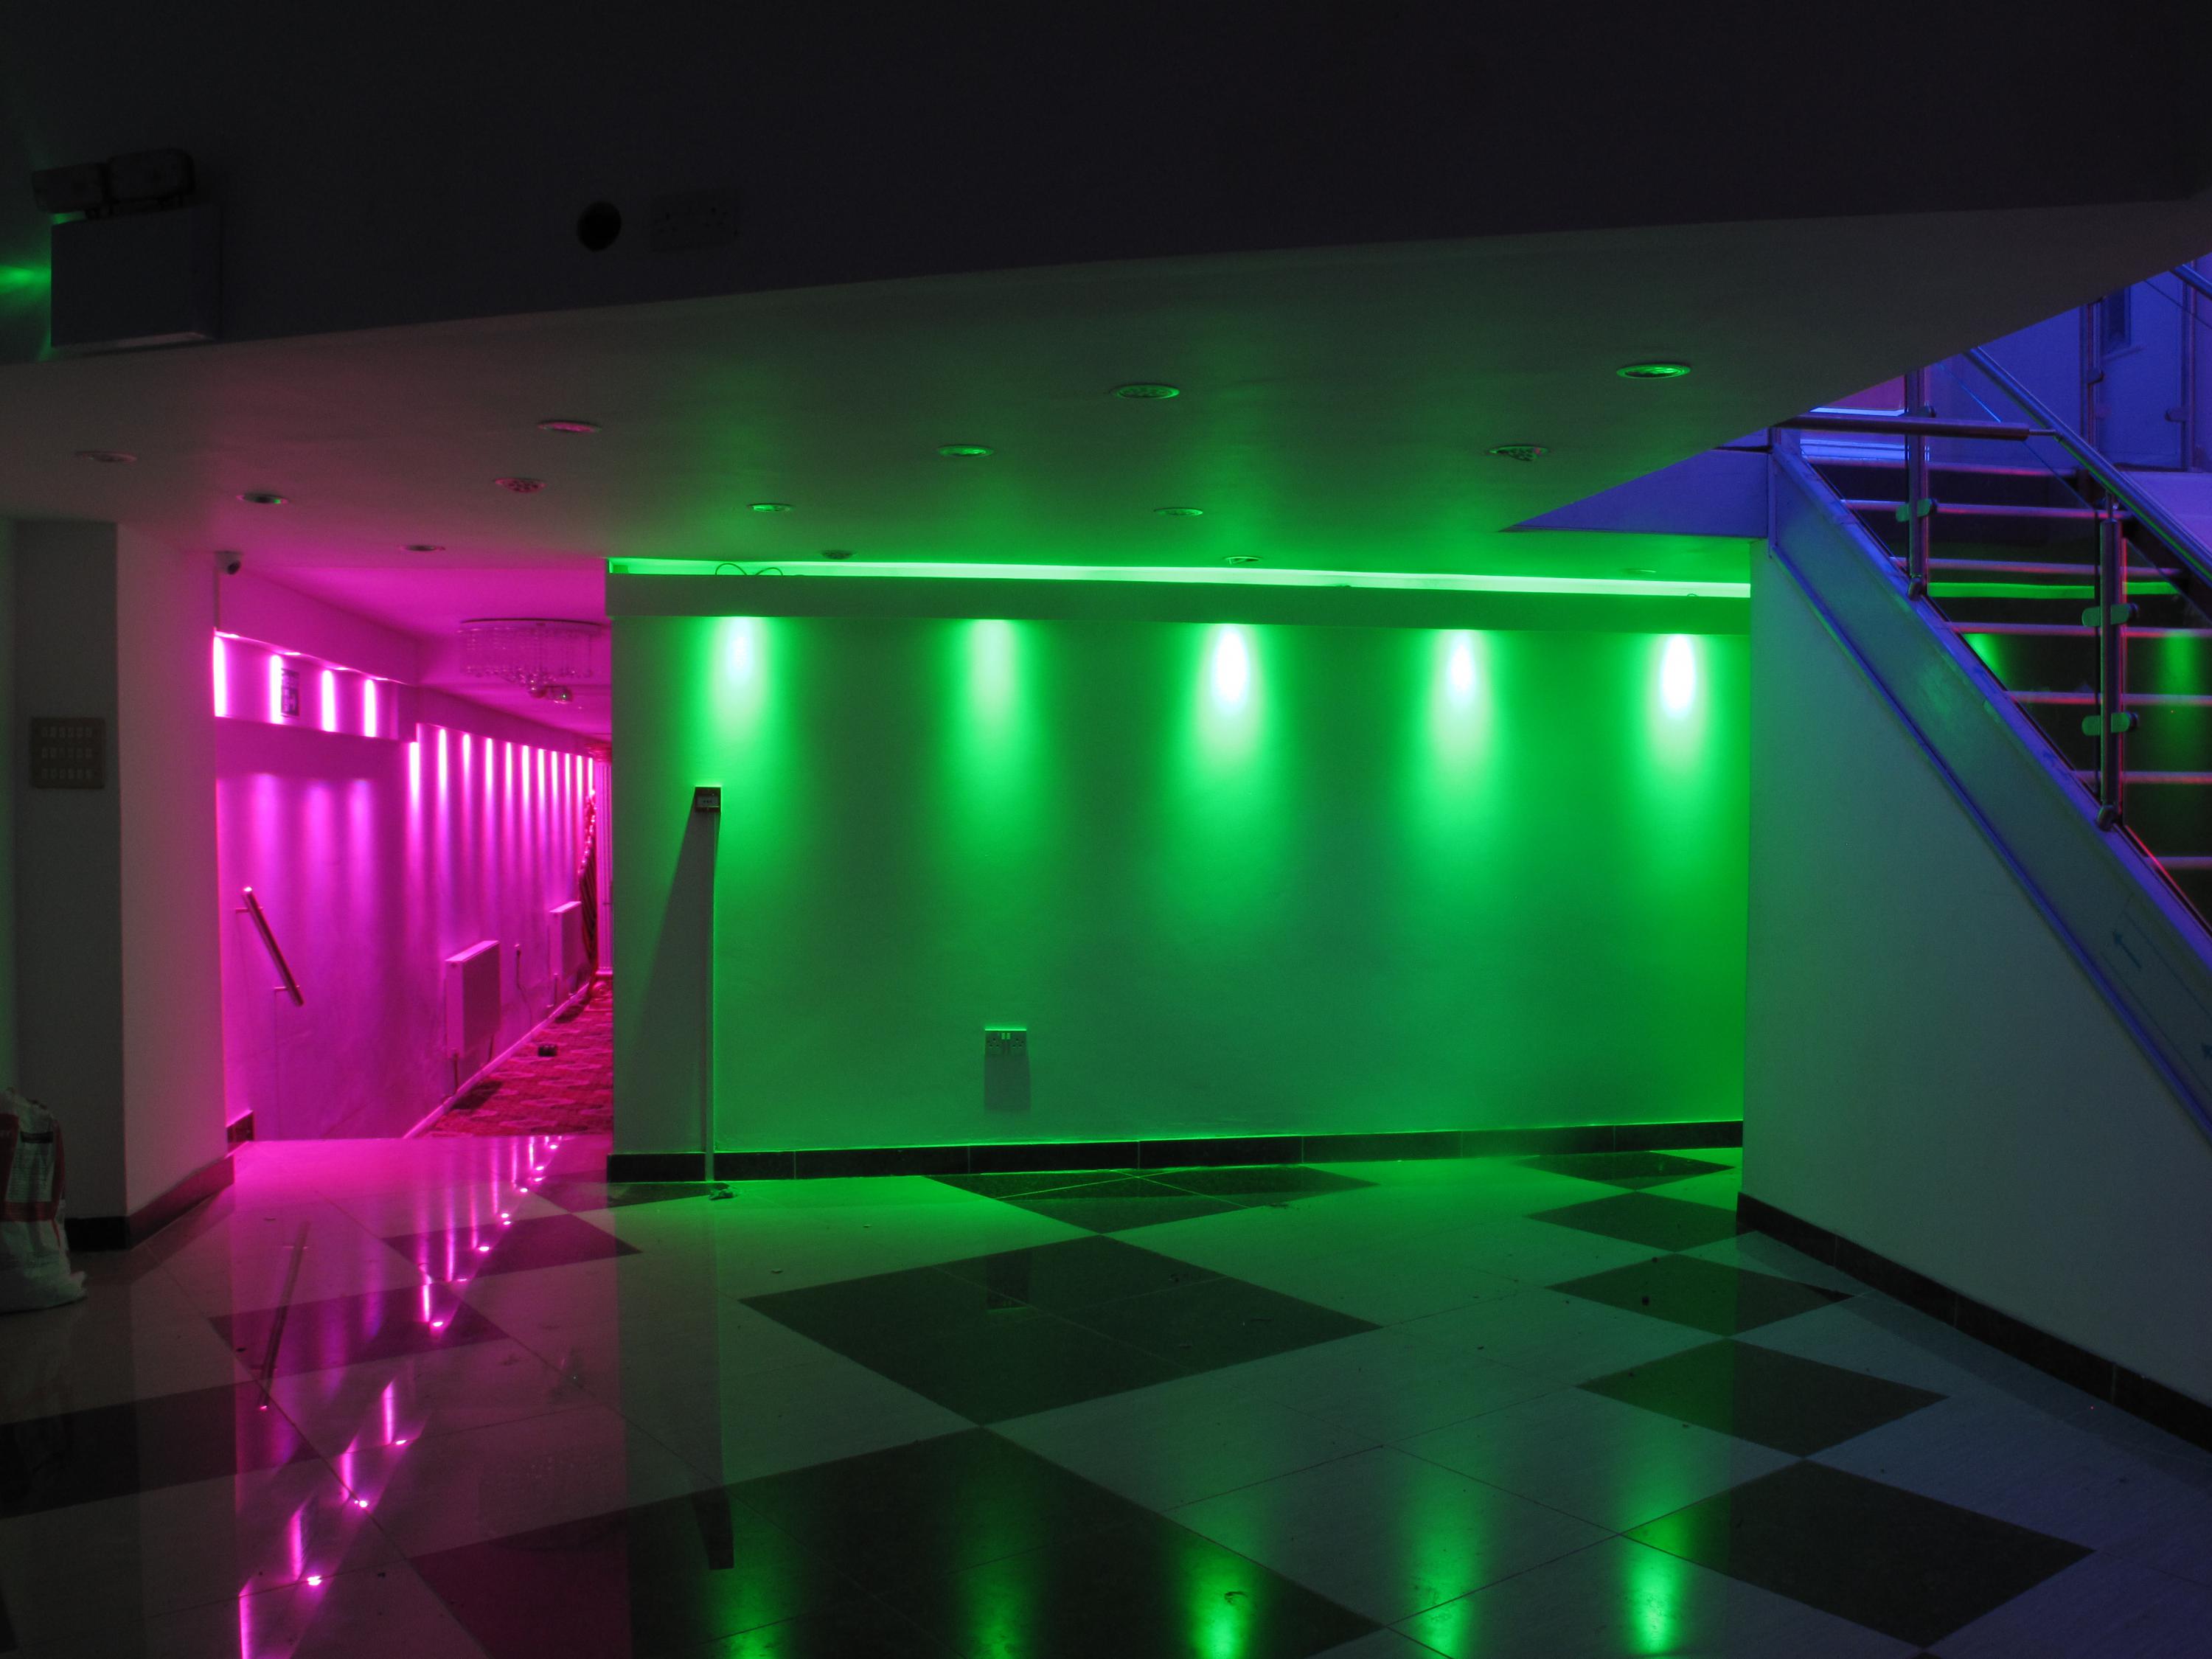 Ultimate Led Lights For Room Examples with Epic Design ideas